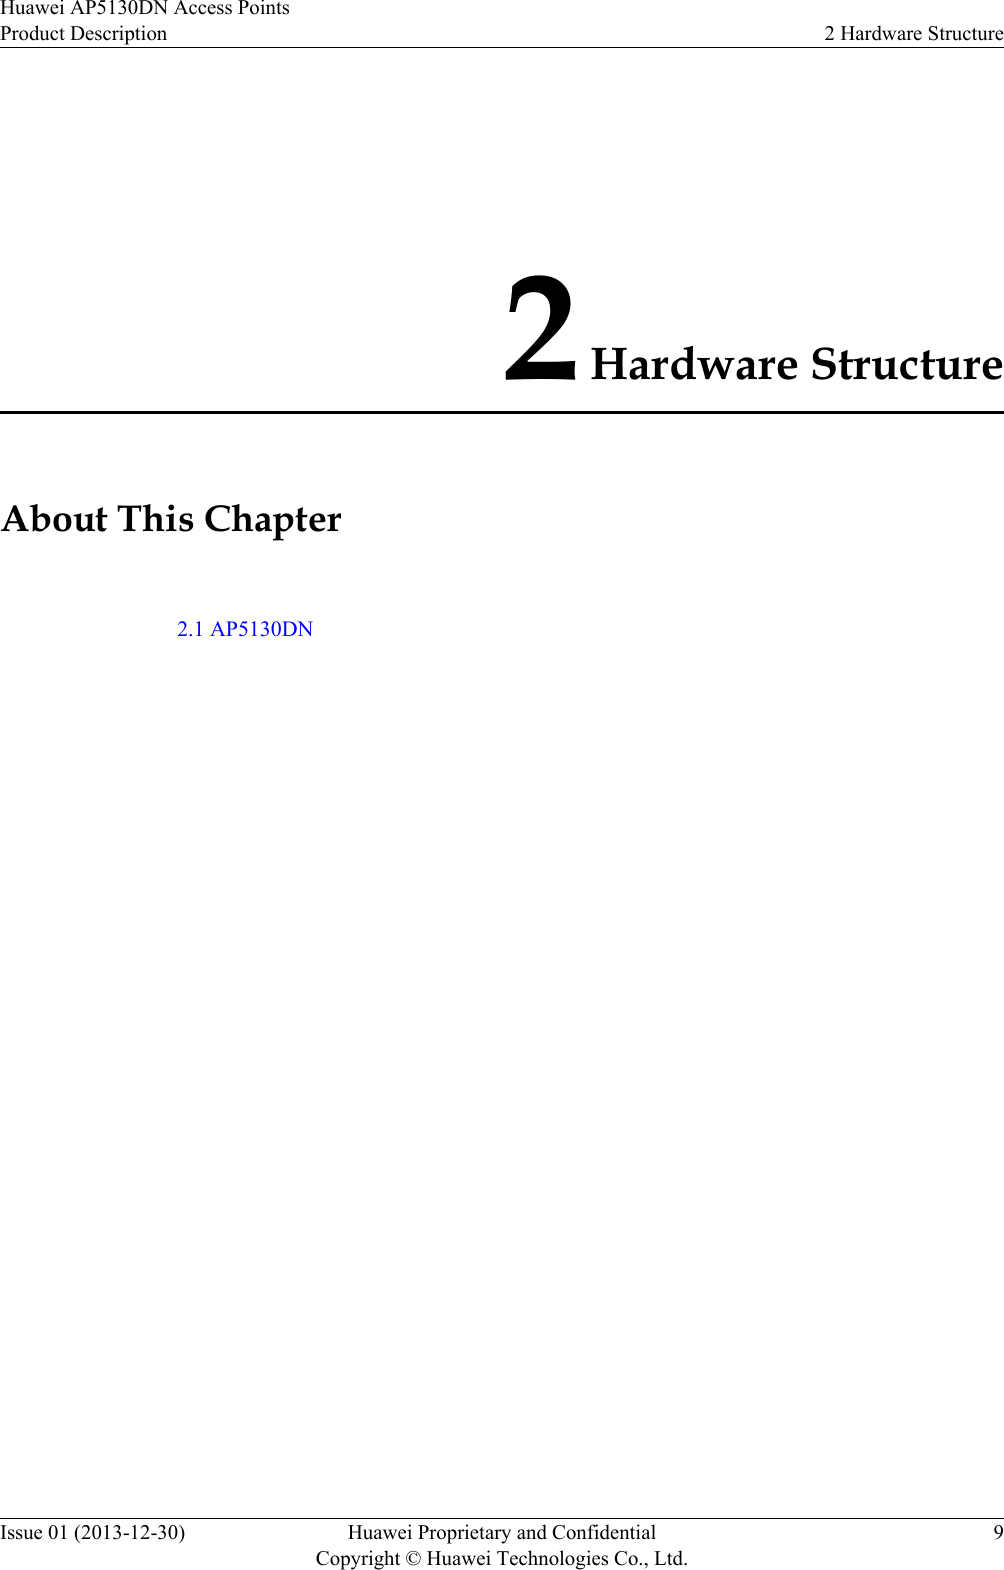 2 Hardware StructureAbout This Chapter2.1 AP5130DNHuawei AP5130DN Access PointsProduct Description 2 Hardware StructureIssue 01 (2013-12-30) Huawei Proprietary and ConfidentialCopyright © Huawei Technologies Co., Ltd.9